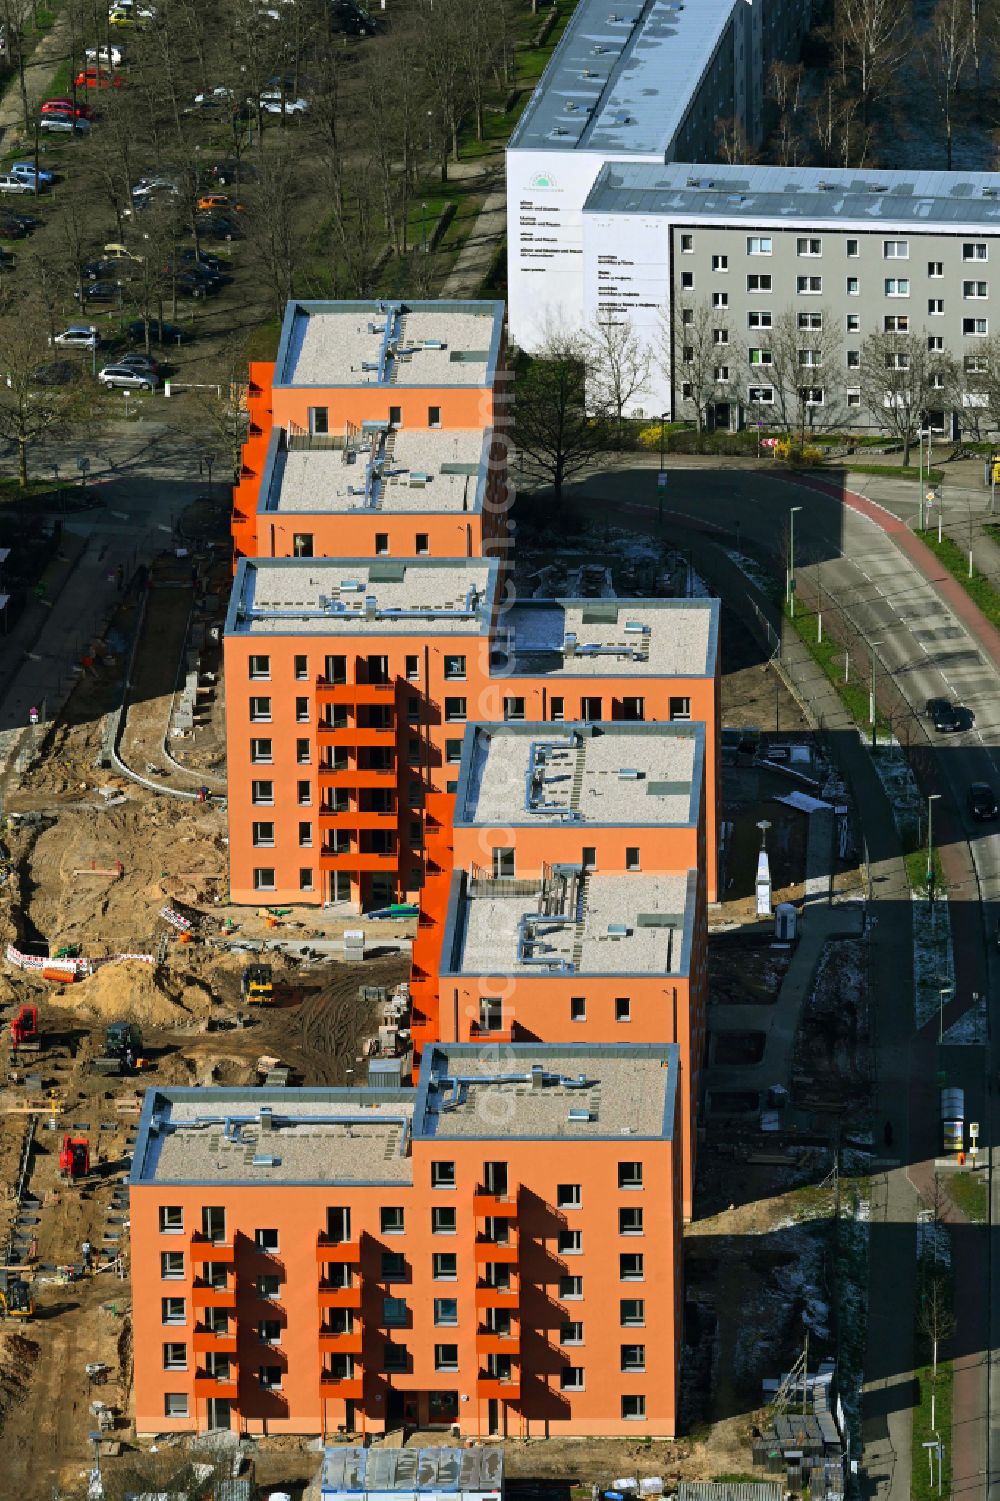 Berlin from above - Construction site to build a new multi-family residential complex Gothaer Strasse - Alte Hellersdorfer Strasse in the district Hellersdorf in Berlin, Germany